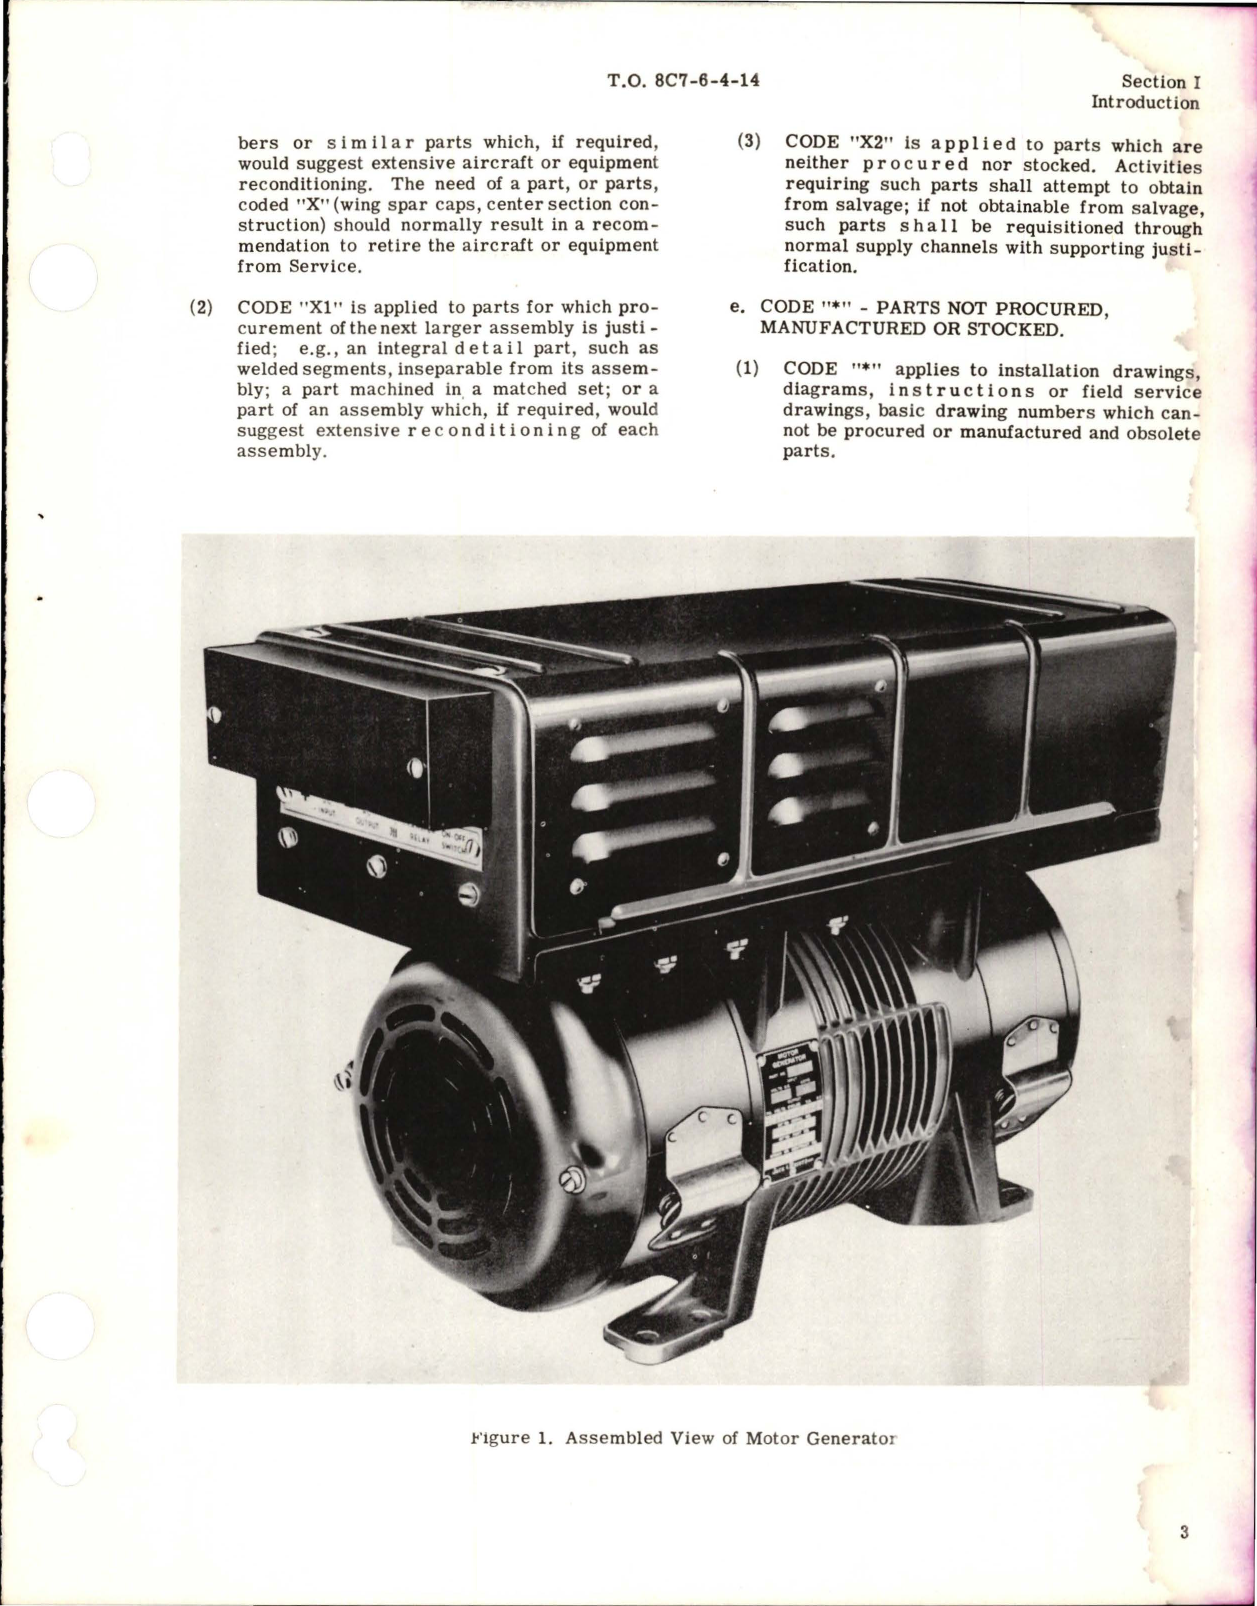 Sample page 5 from AirCorps Library document: Illustrated Parts Breakdown for Motor Generator - Models F137 and F137-1